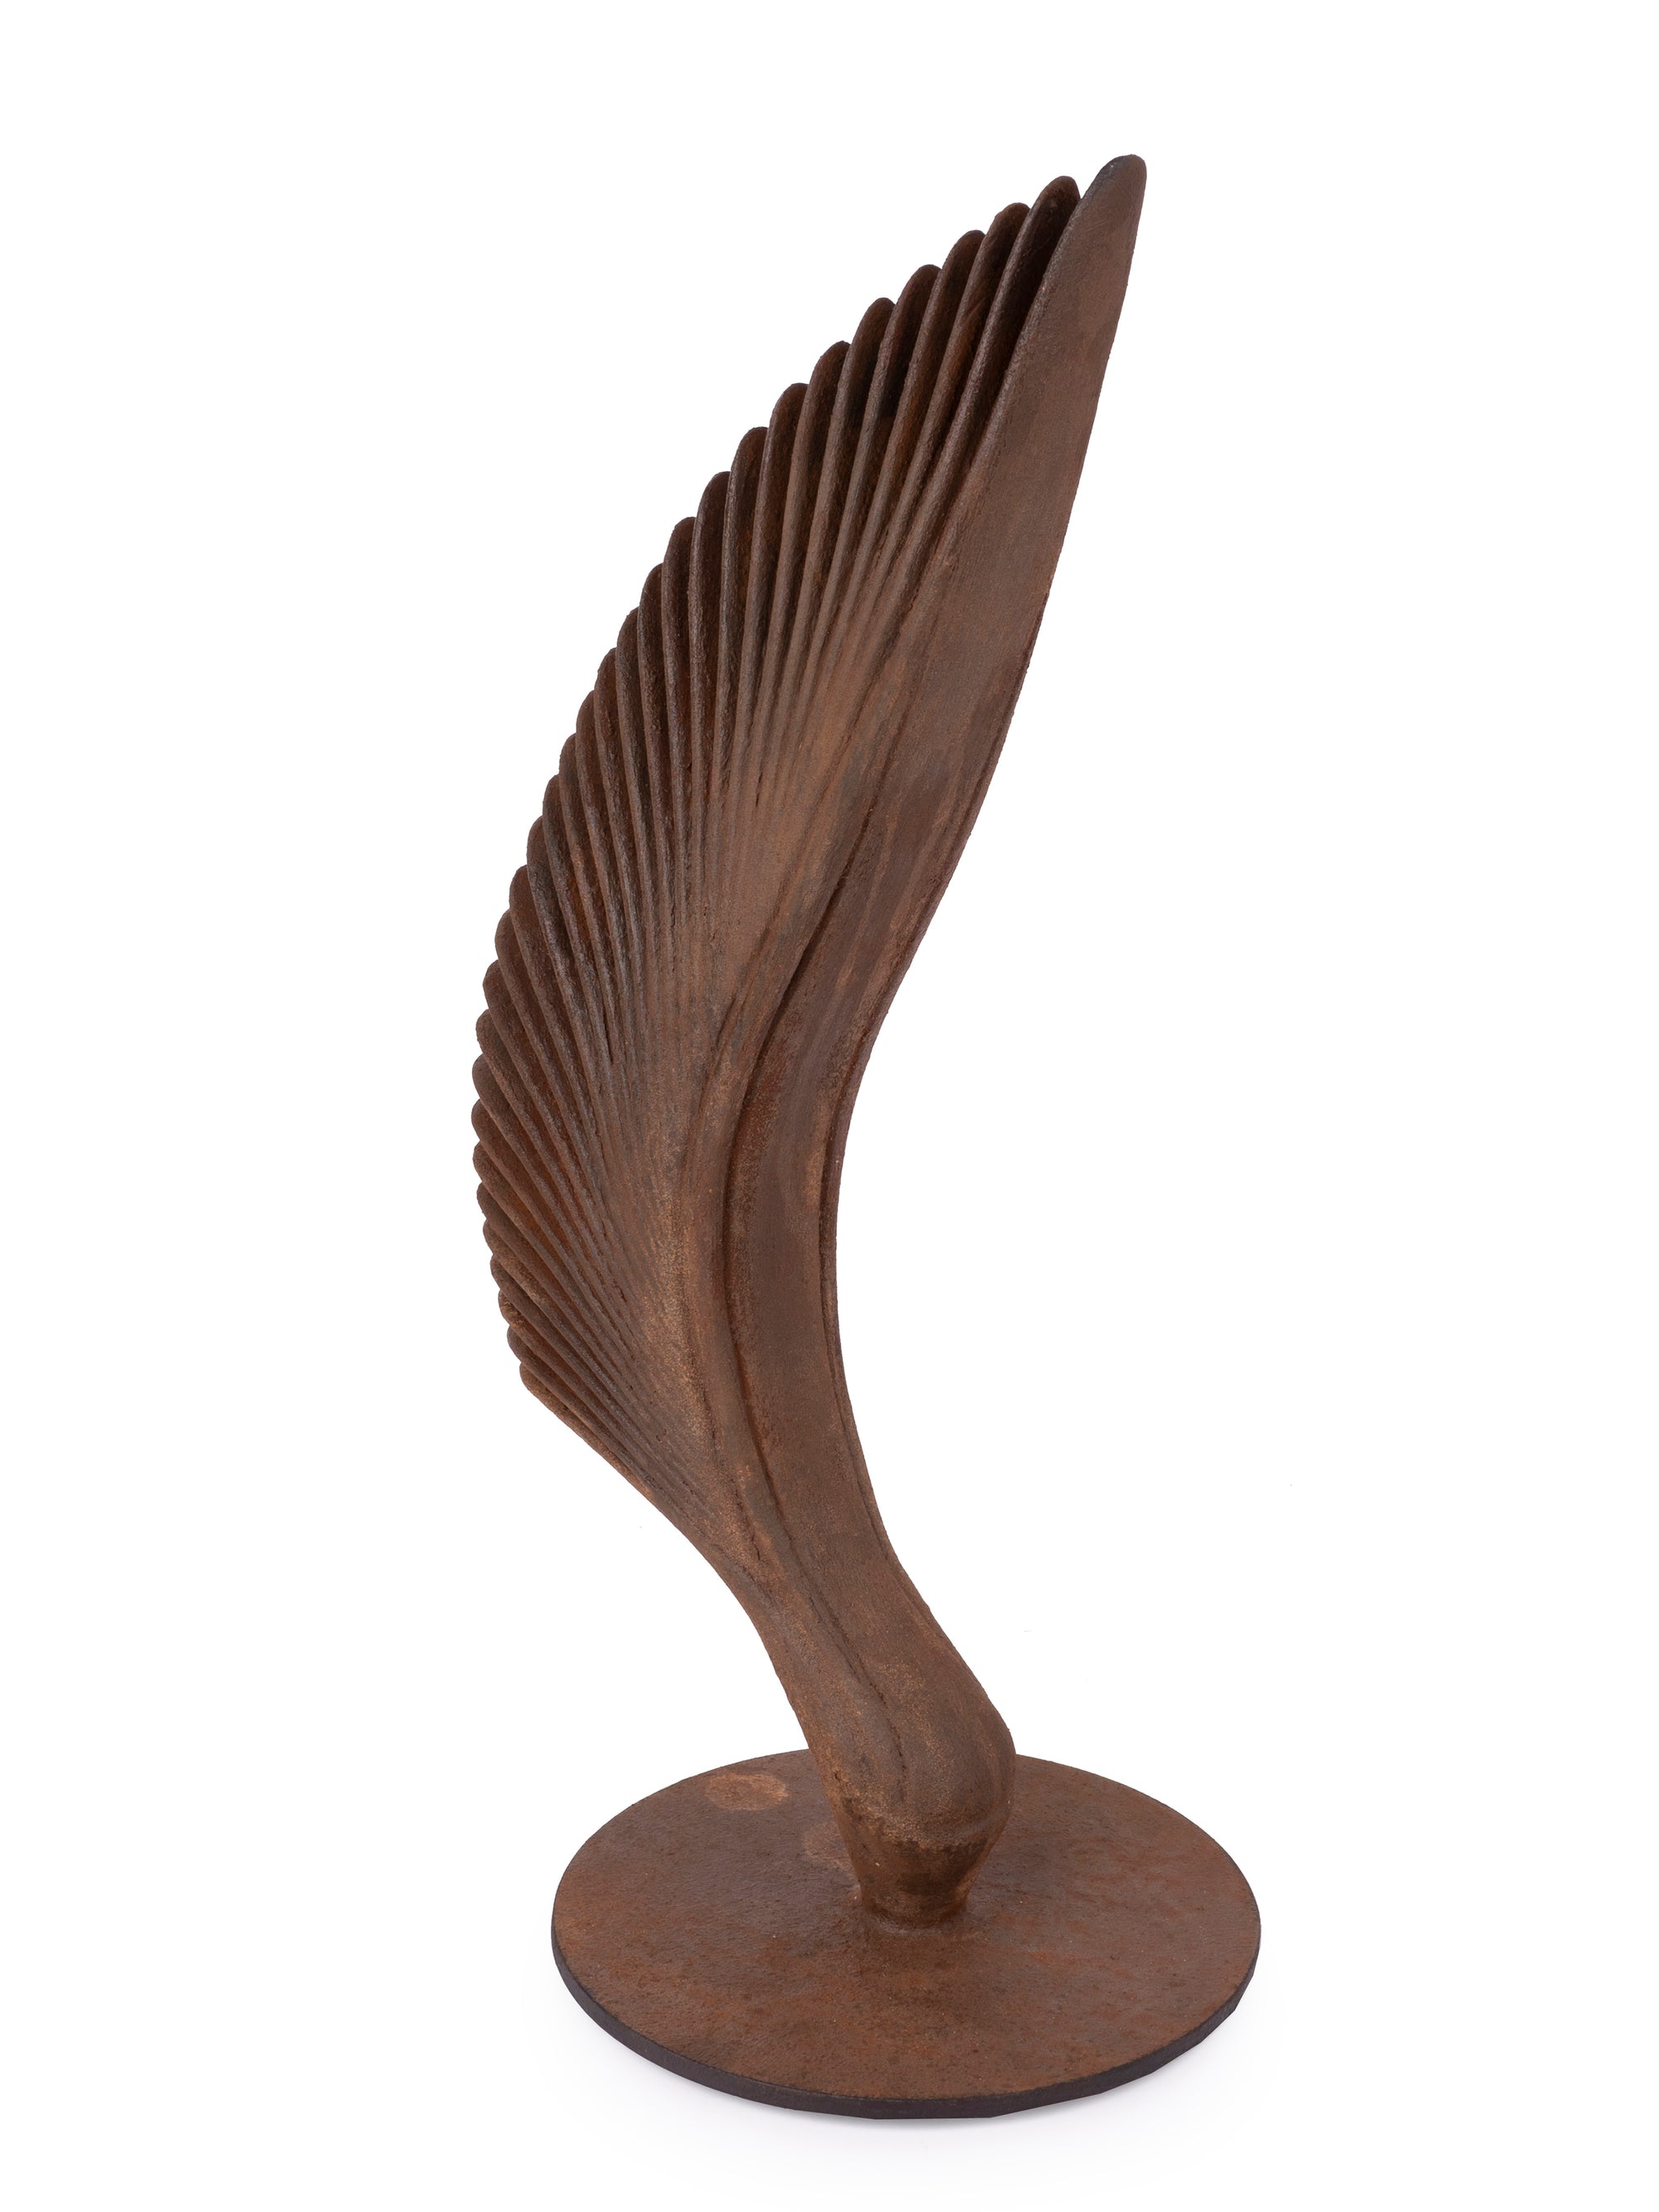 Sculpture name - WINGS OF LIFE (old rustic finish) - The Heritage Artifacts